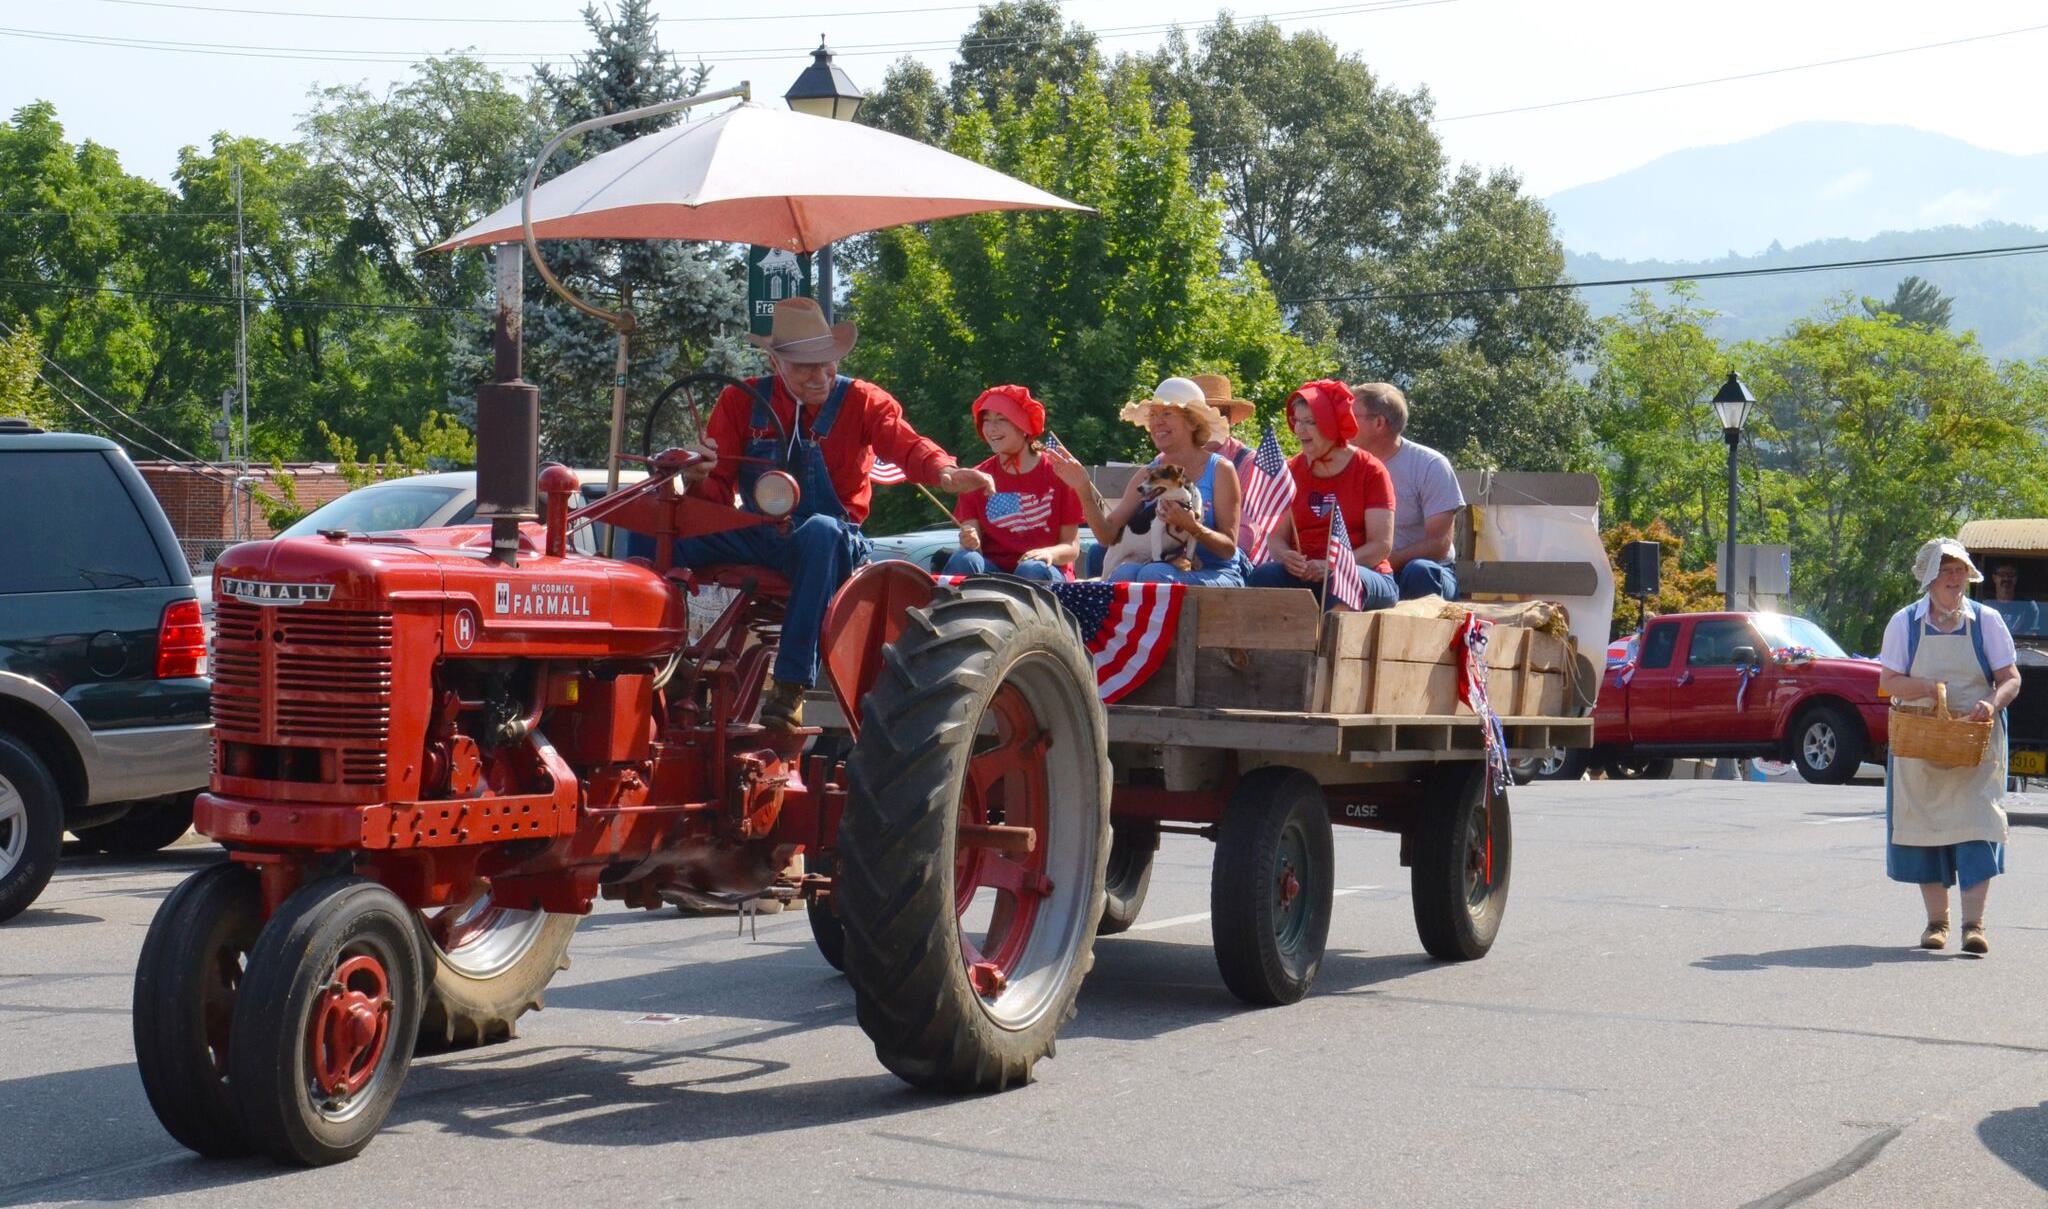 July 4th Parade in Franklin, NC